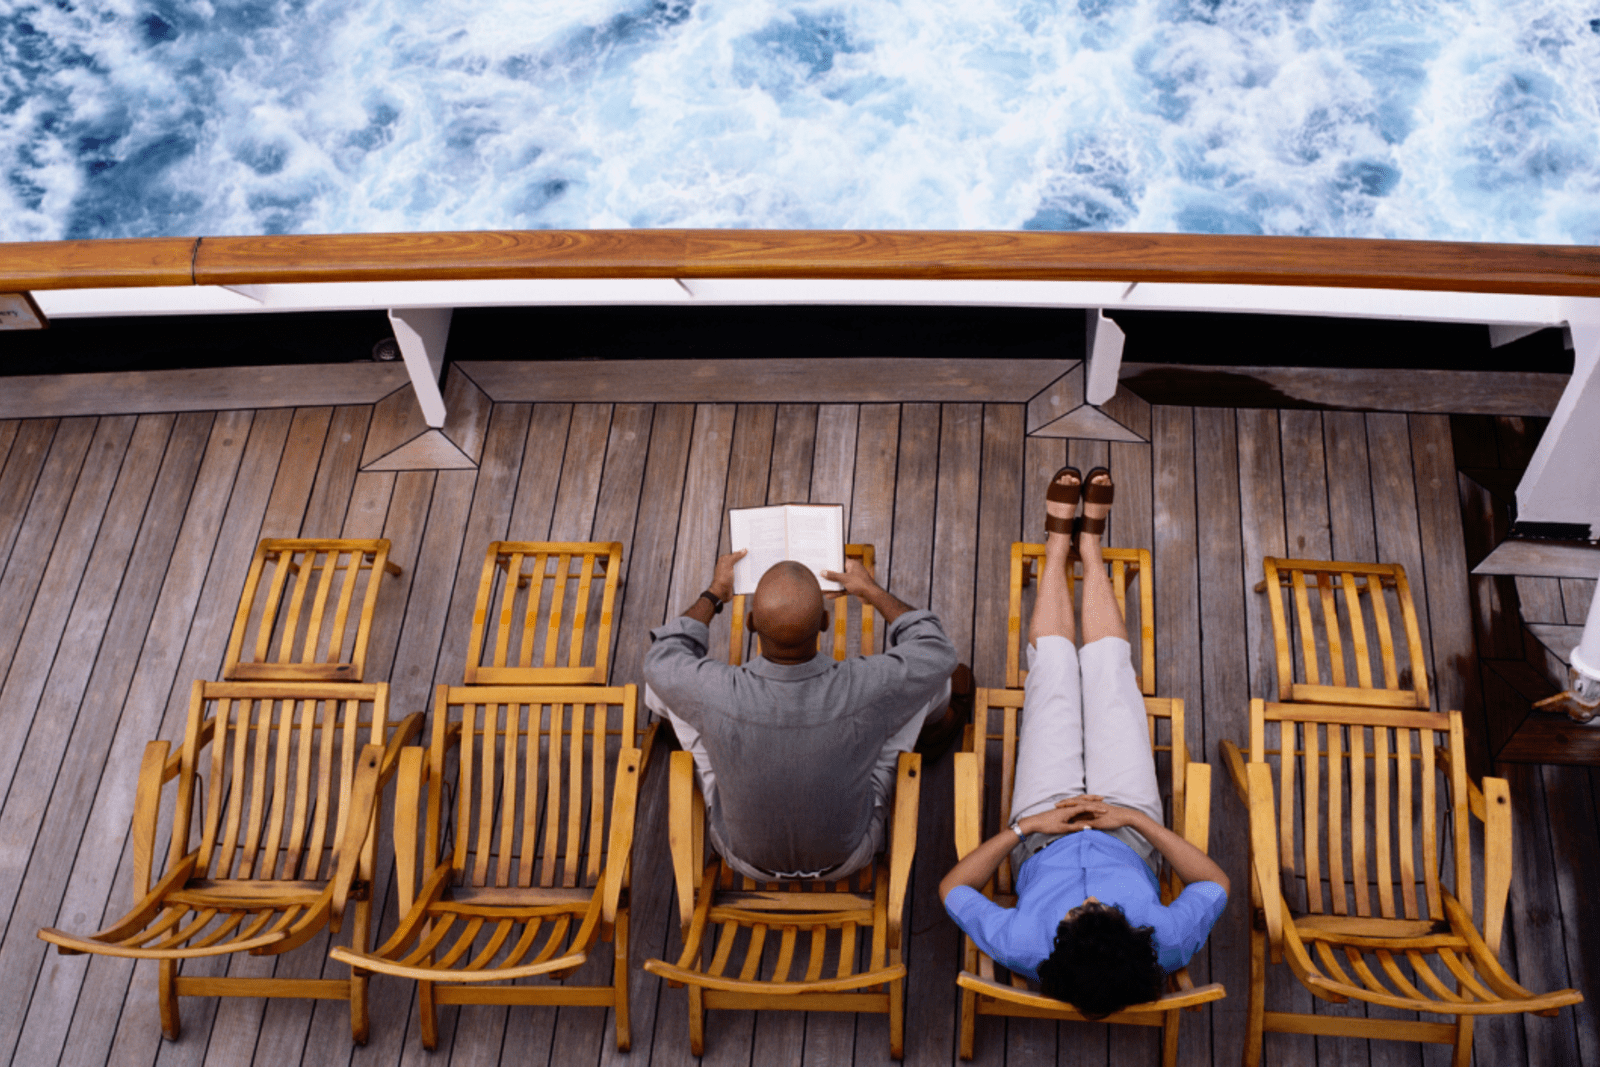 Two passengers relaxing on the deck of a cruise ship; one of them is reading a book